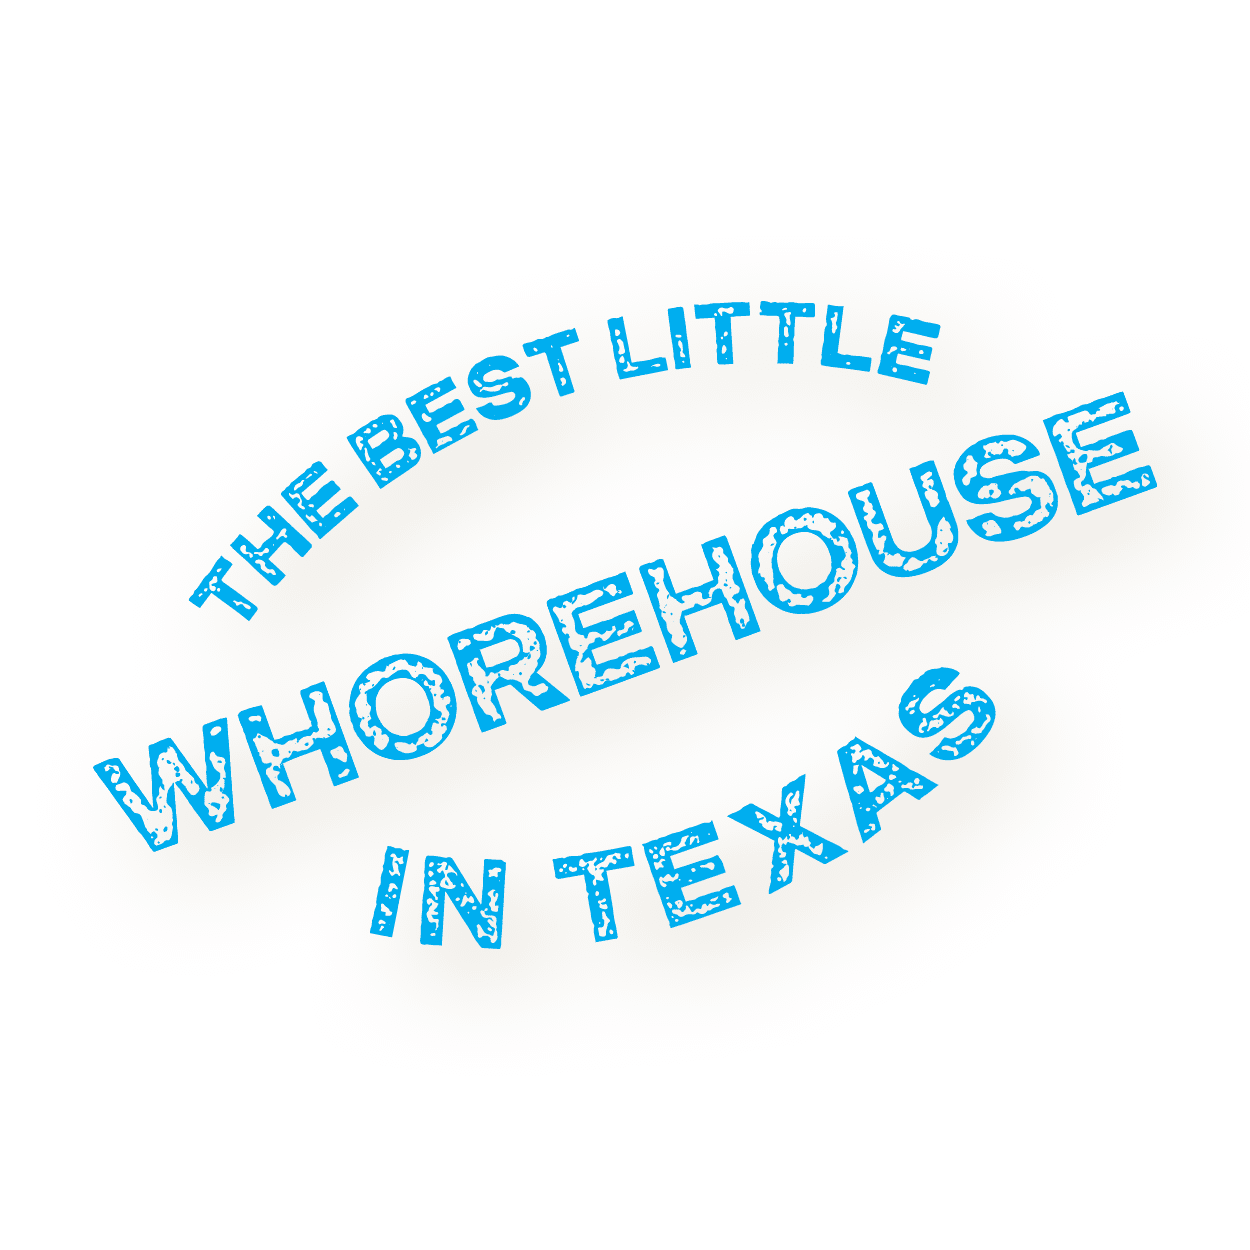 The Best Little Whorehouse in Texas title art